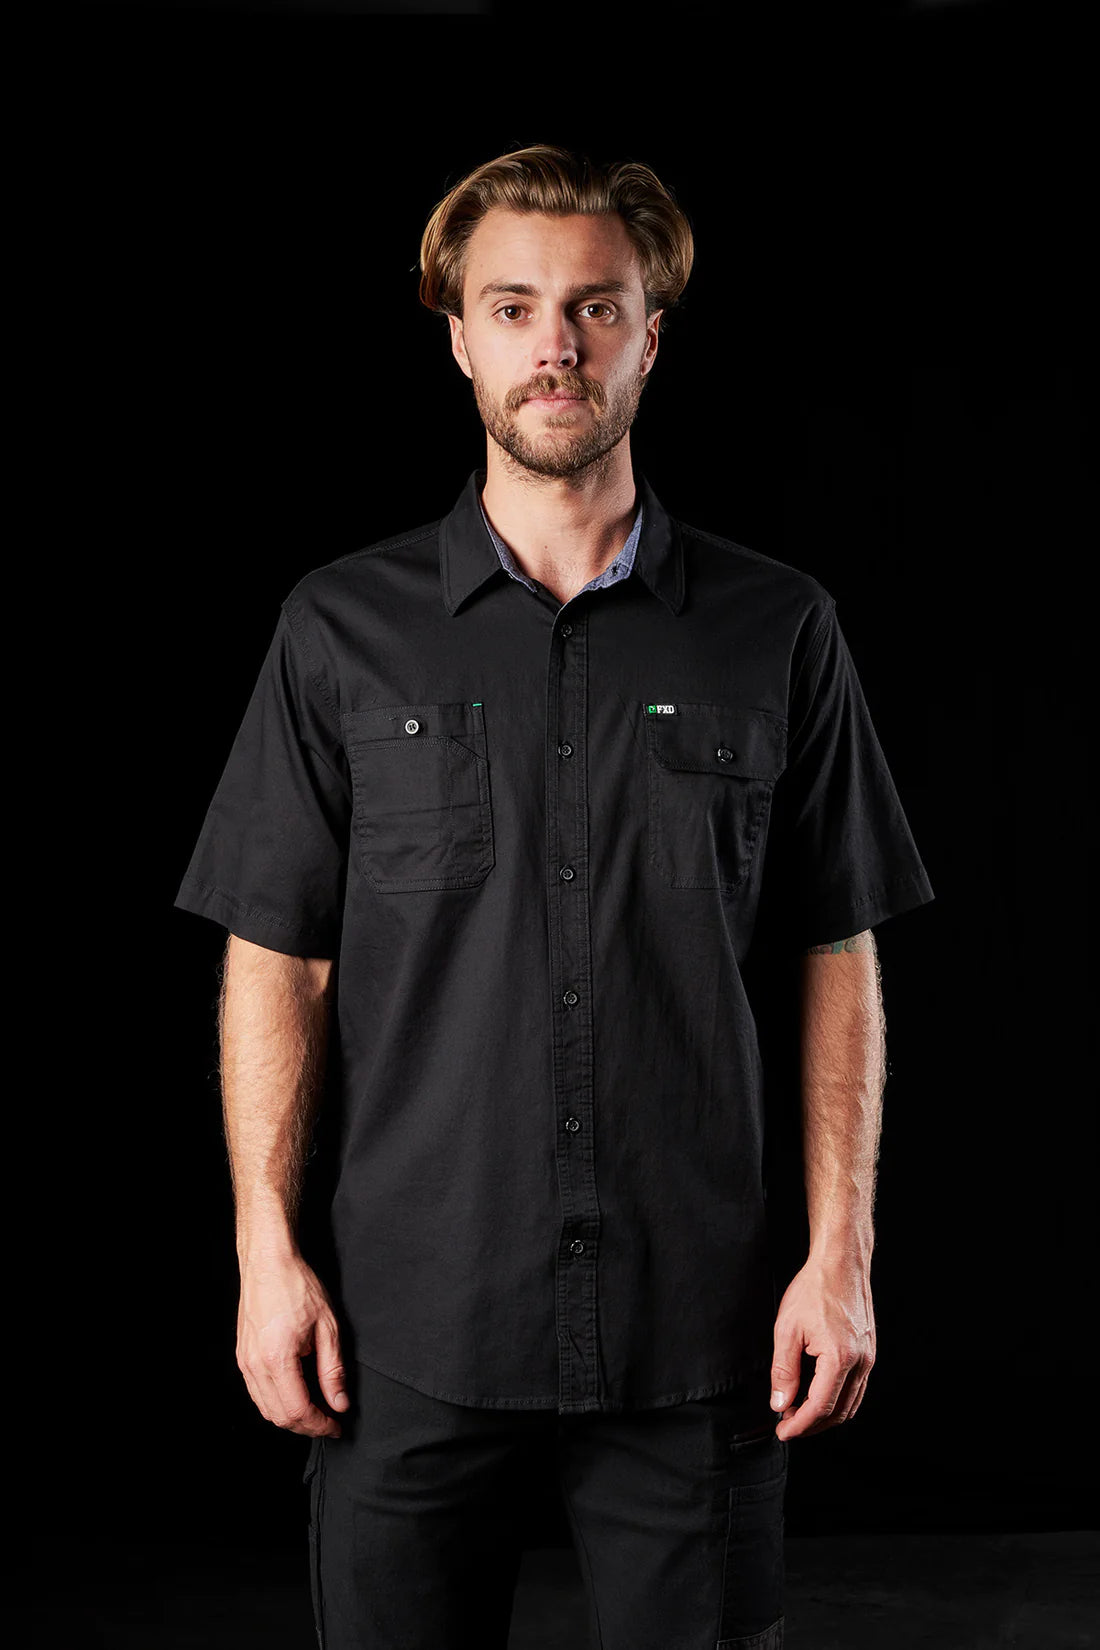 Mens work shirts - FXD - Adelaide